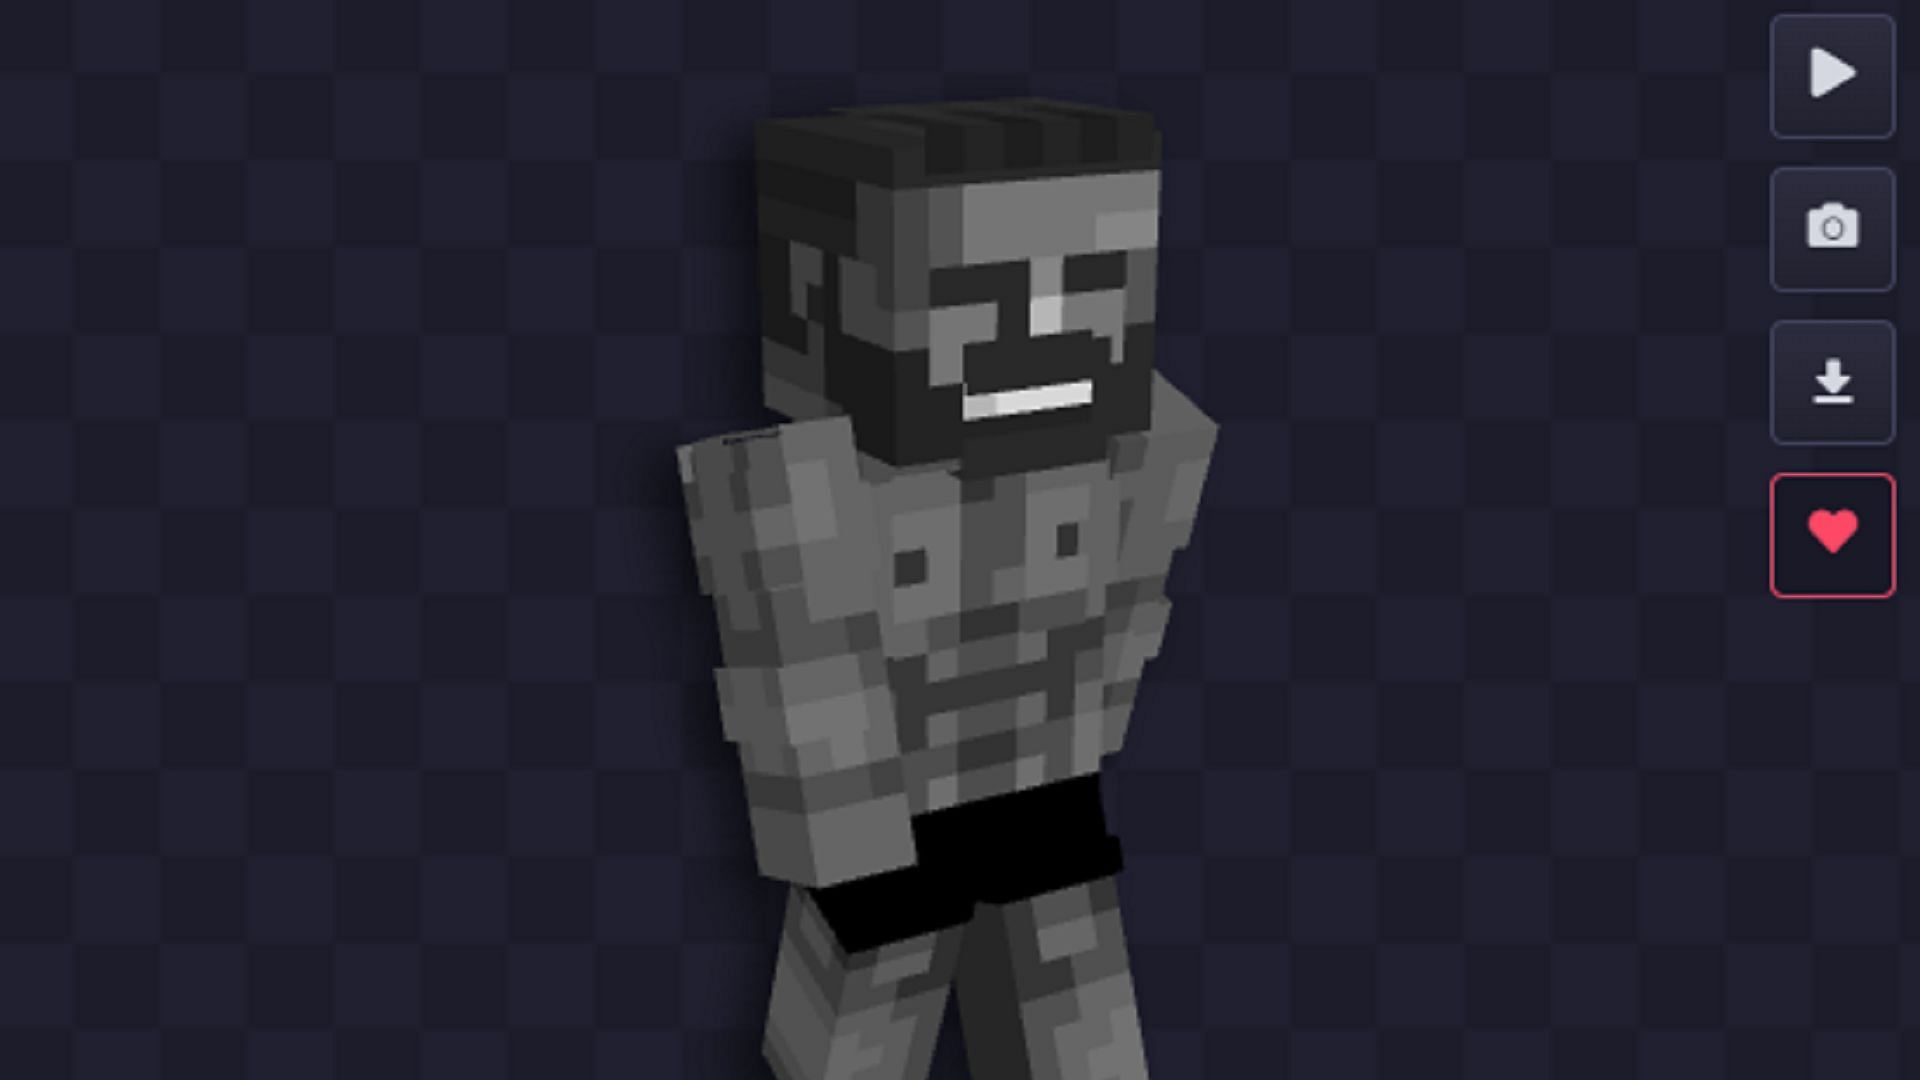 Minecraft players can become Minecraft enjoyers when they equip this skin (Image via NameMC)